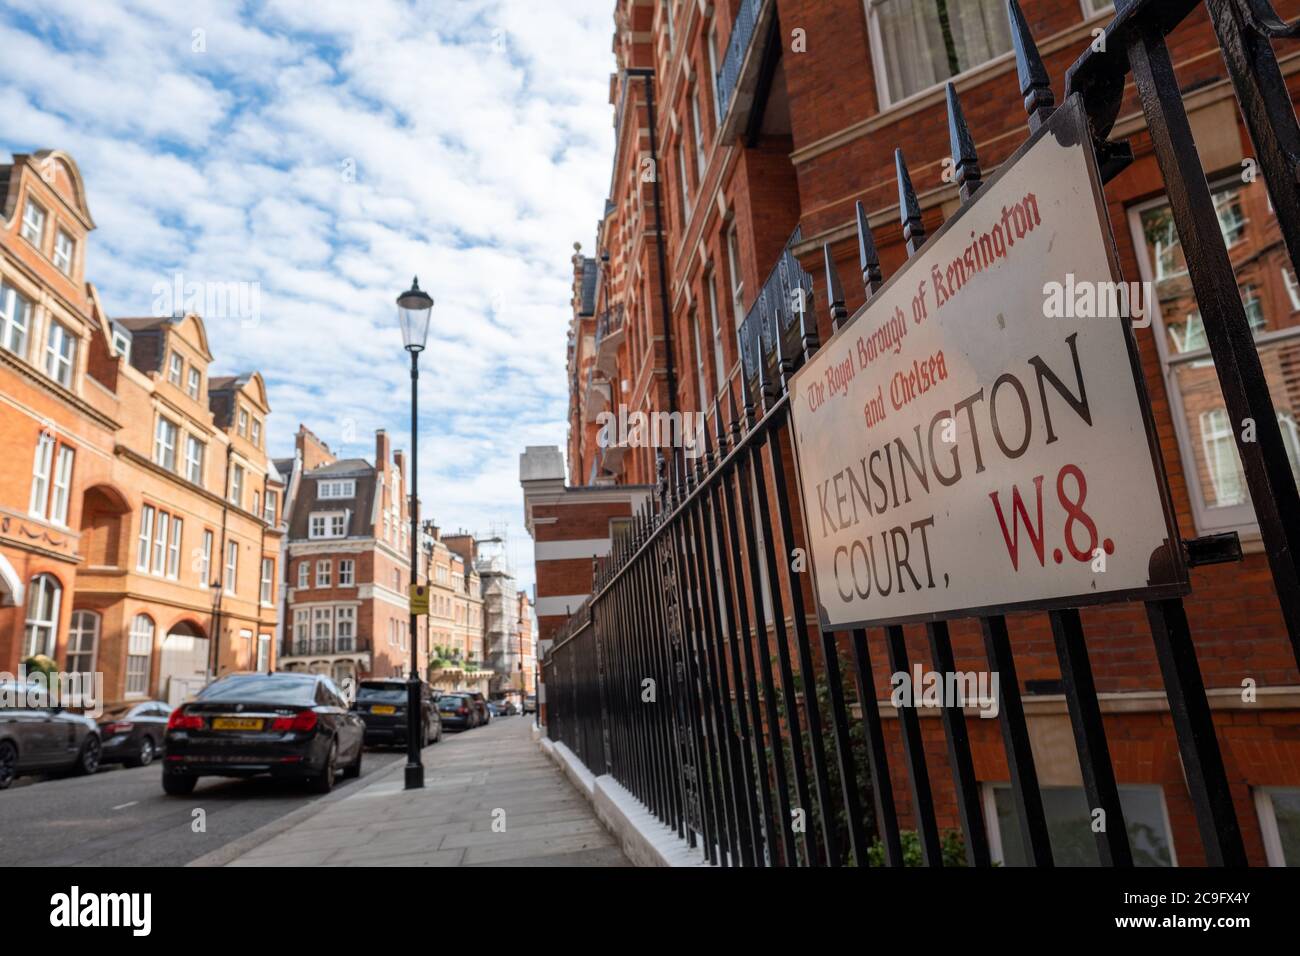 London, July, 2020: Residential street of beautiful red brick terraced London townhouses in Kensington Court, west London Stock Photo